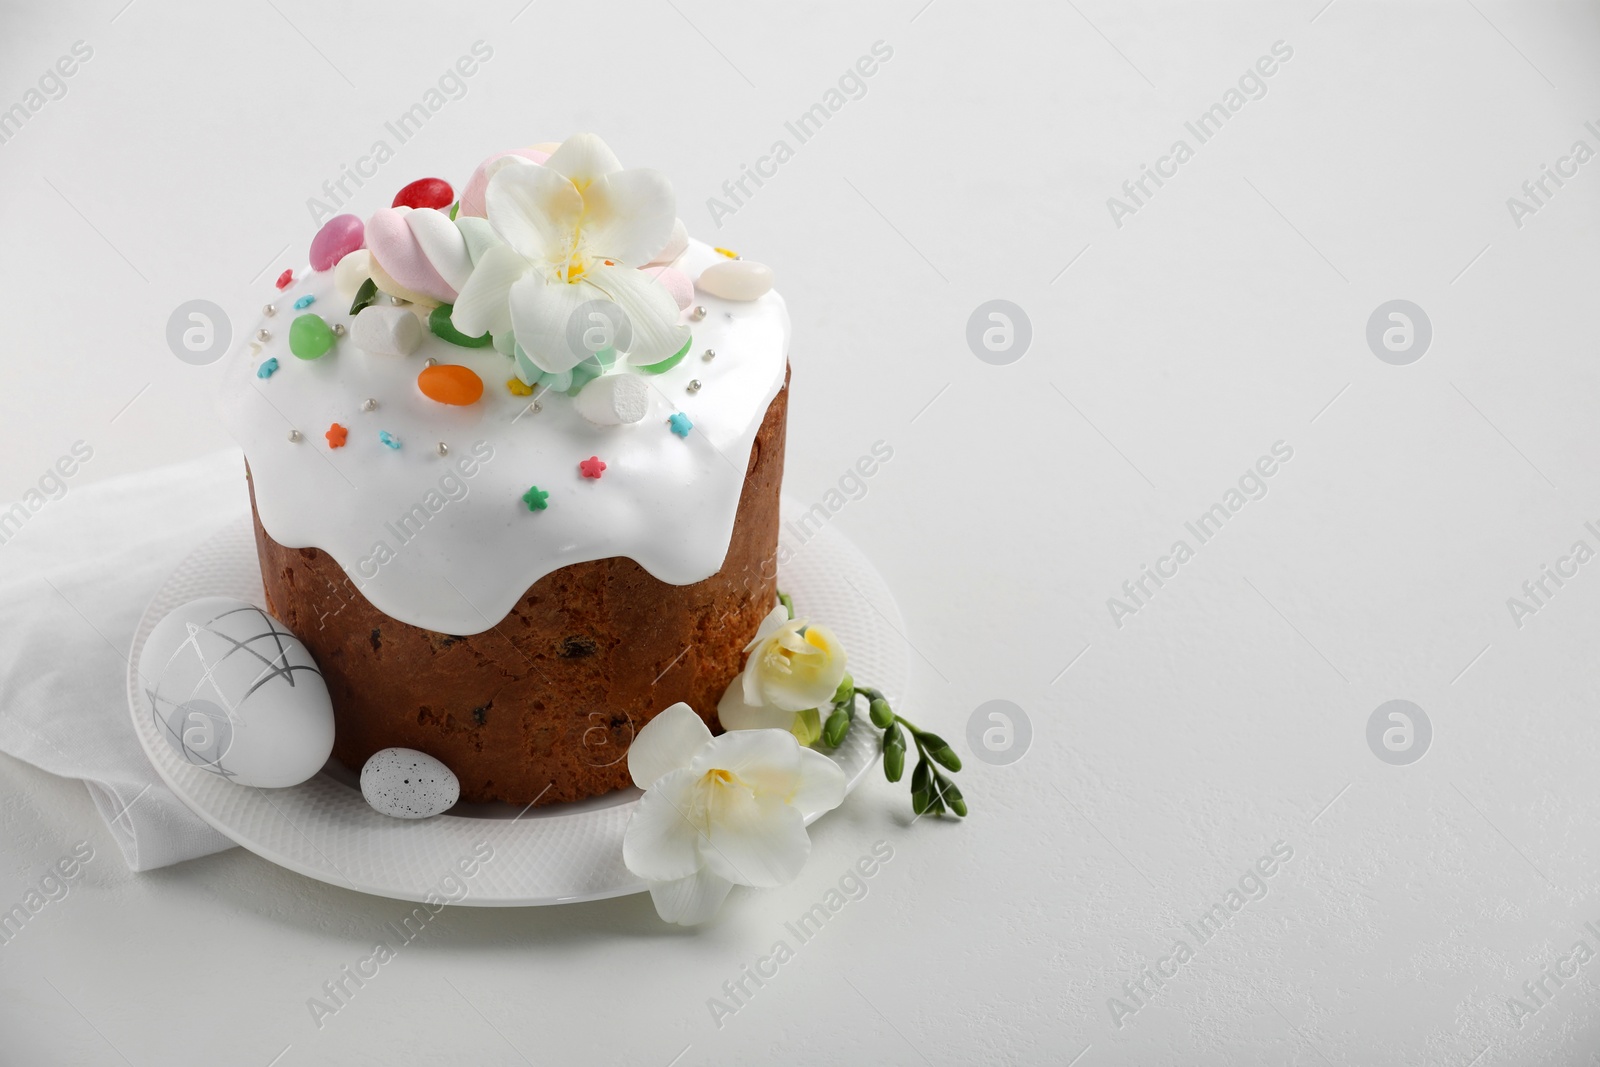 Photo of Traditional Easter cake with sprinkles, jelly beans, marshmallows, flowers and decorated eggs on white table, space for text